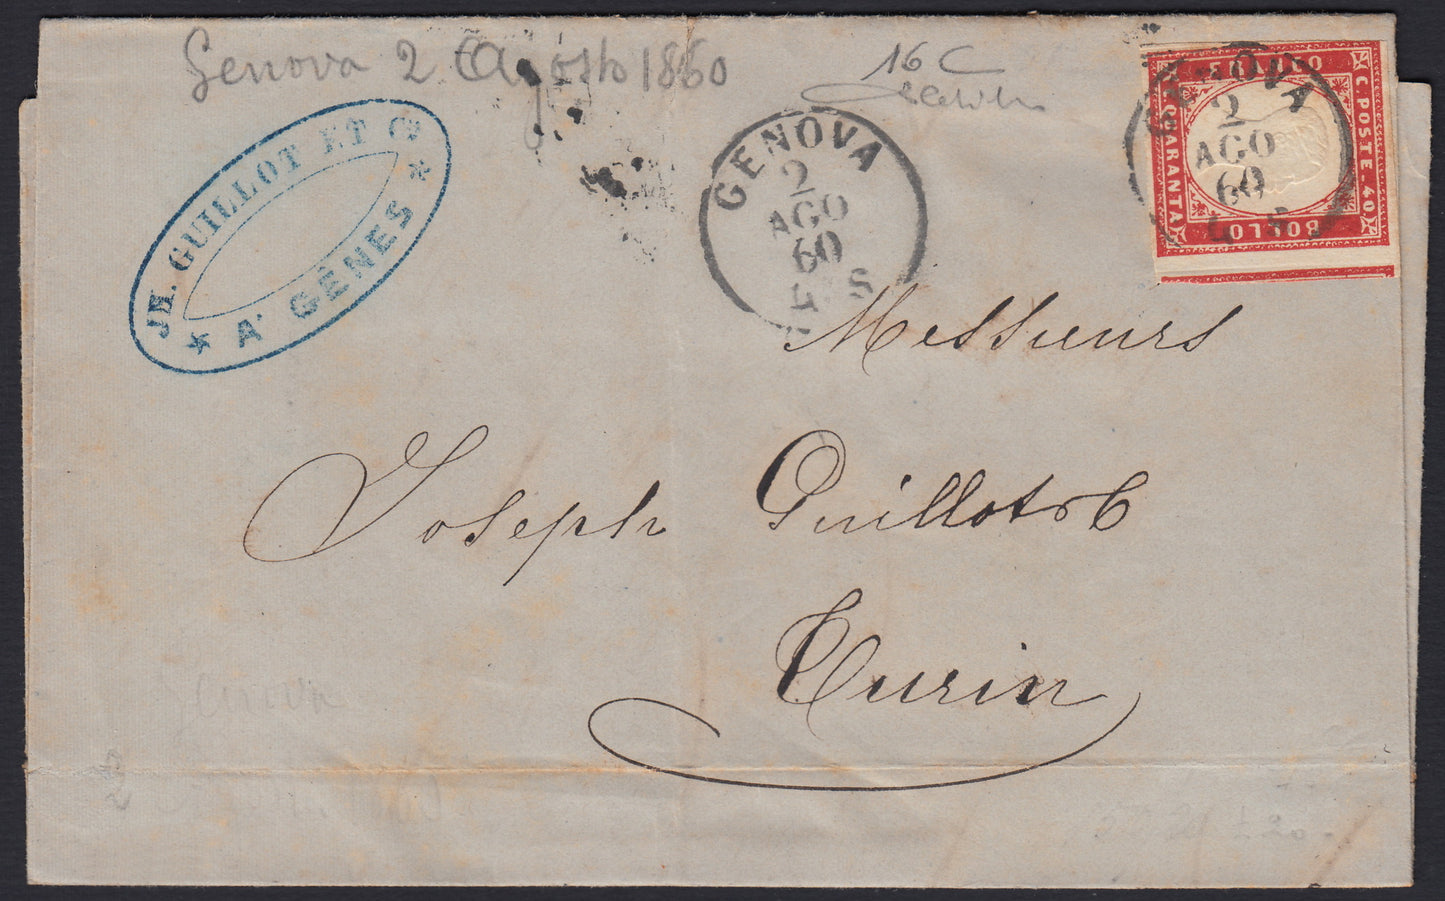 258 - 1860 - IV issue, Letter sent from Genoa to Turin 2/8/60 franked with c. 40 red edition 1860 (16C)